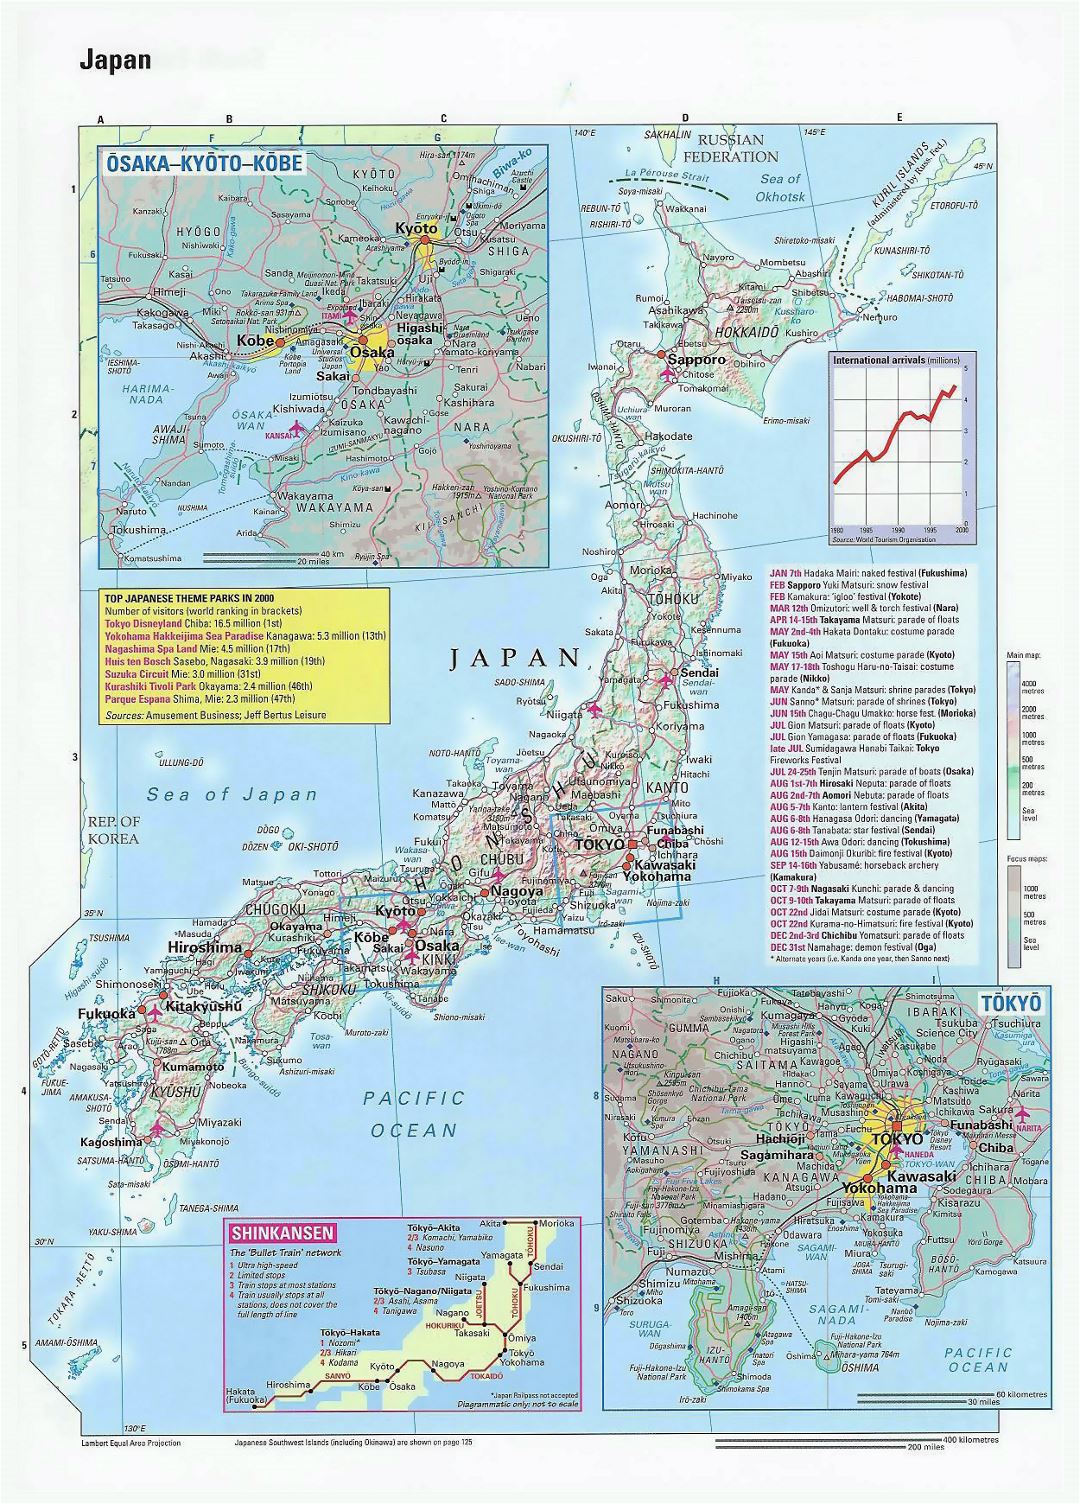 Large map of Japan with relief, roads, cities and airports